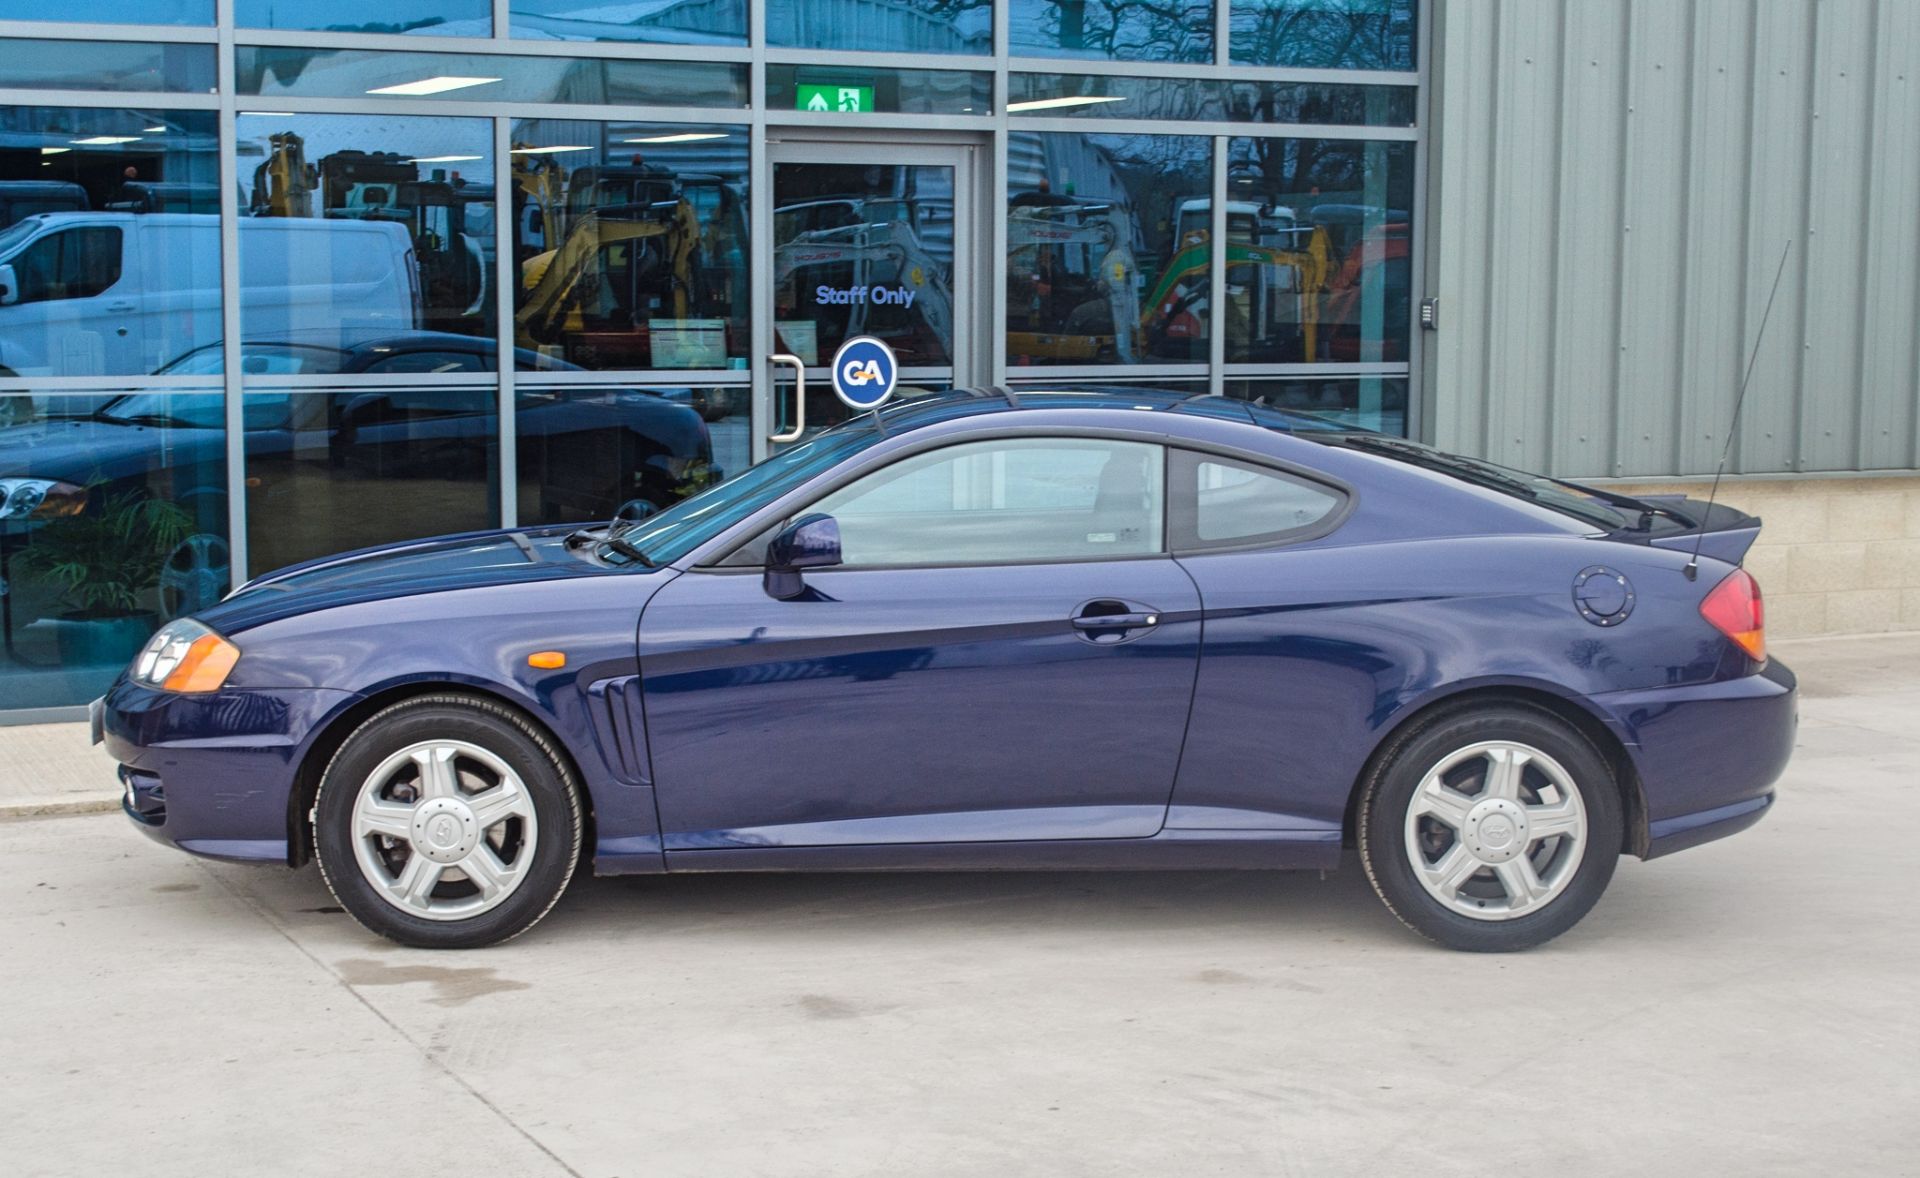 2003 Hyundai Coupe 1.6 S 1600 cc 3 door coupe - Image 16 of 56